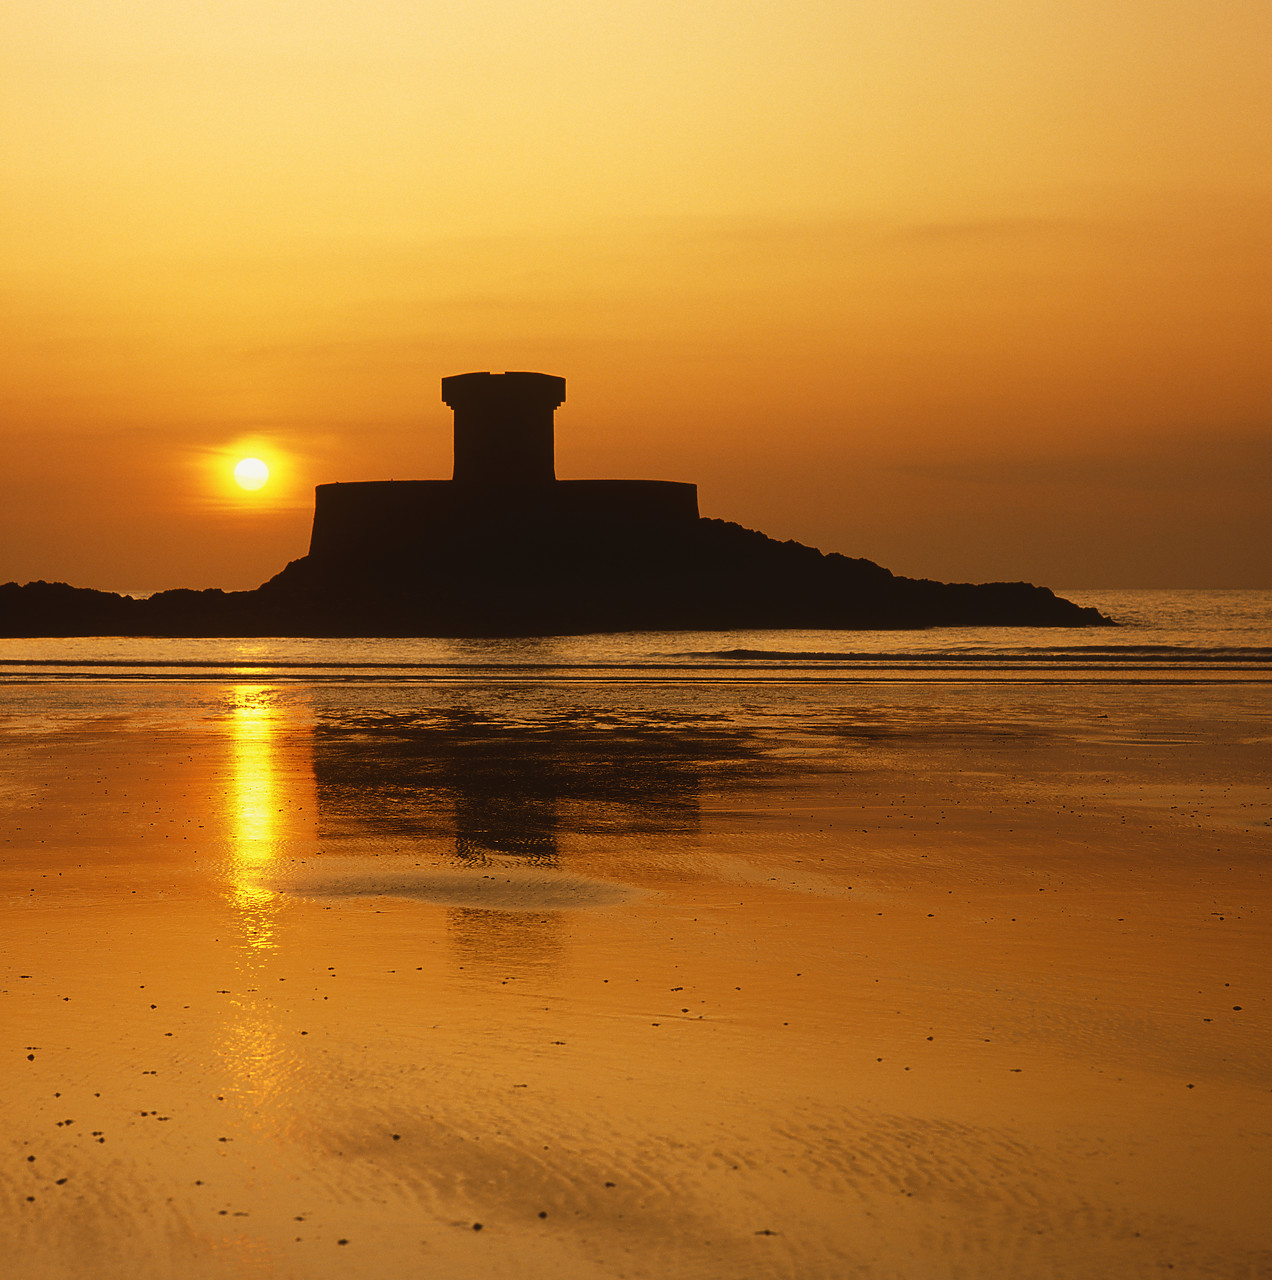 #966189-1 - La Rocca Tower at Sunset, St. Ouen's Bay, Jersey, Channel Islands